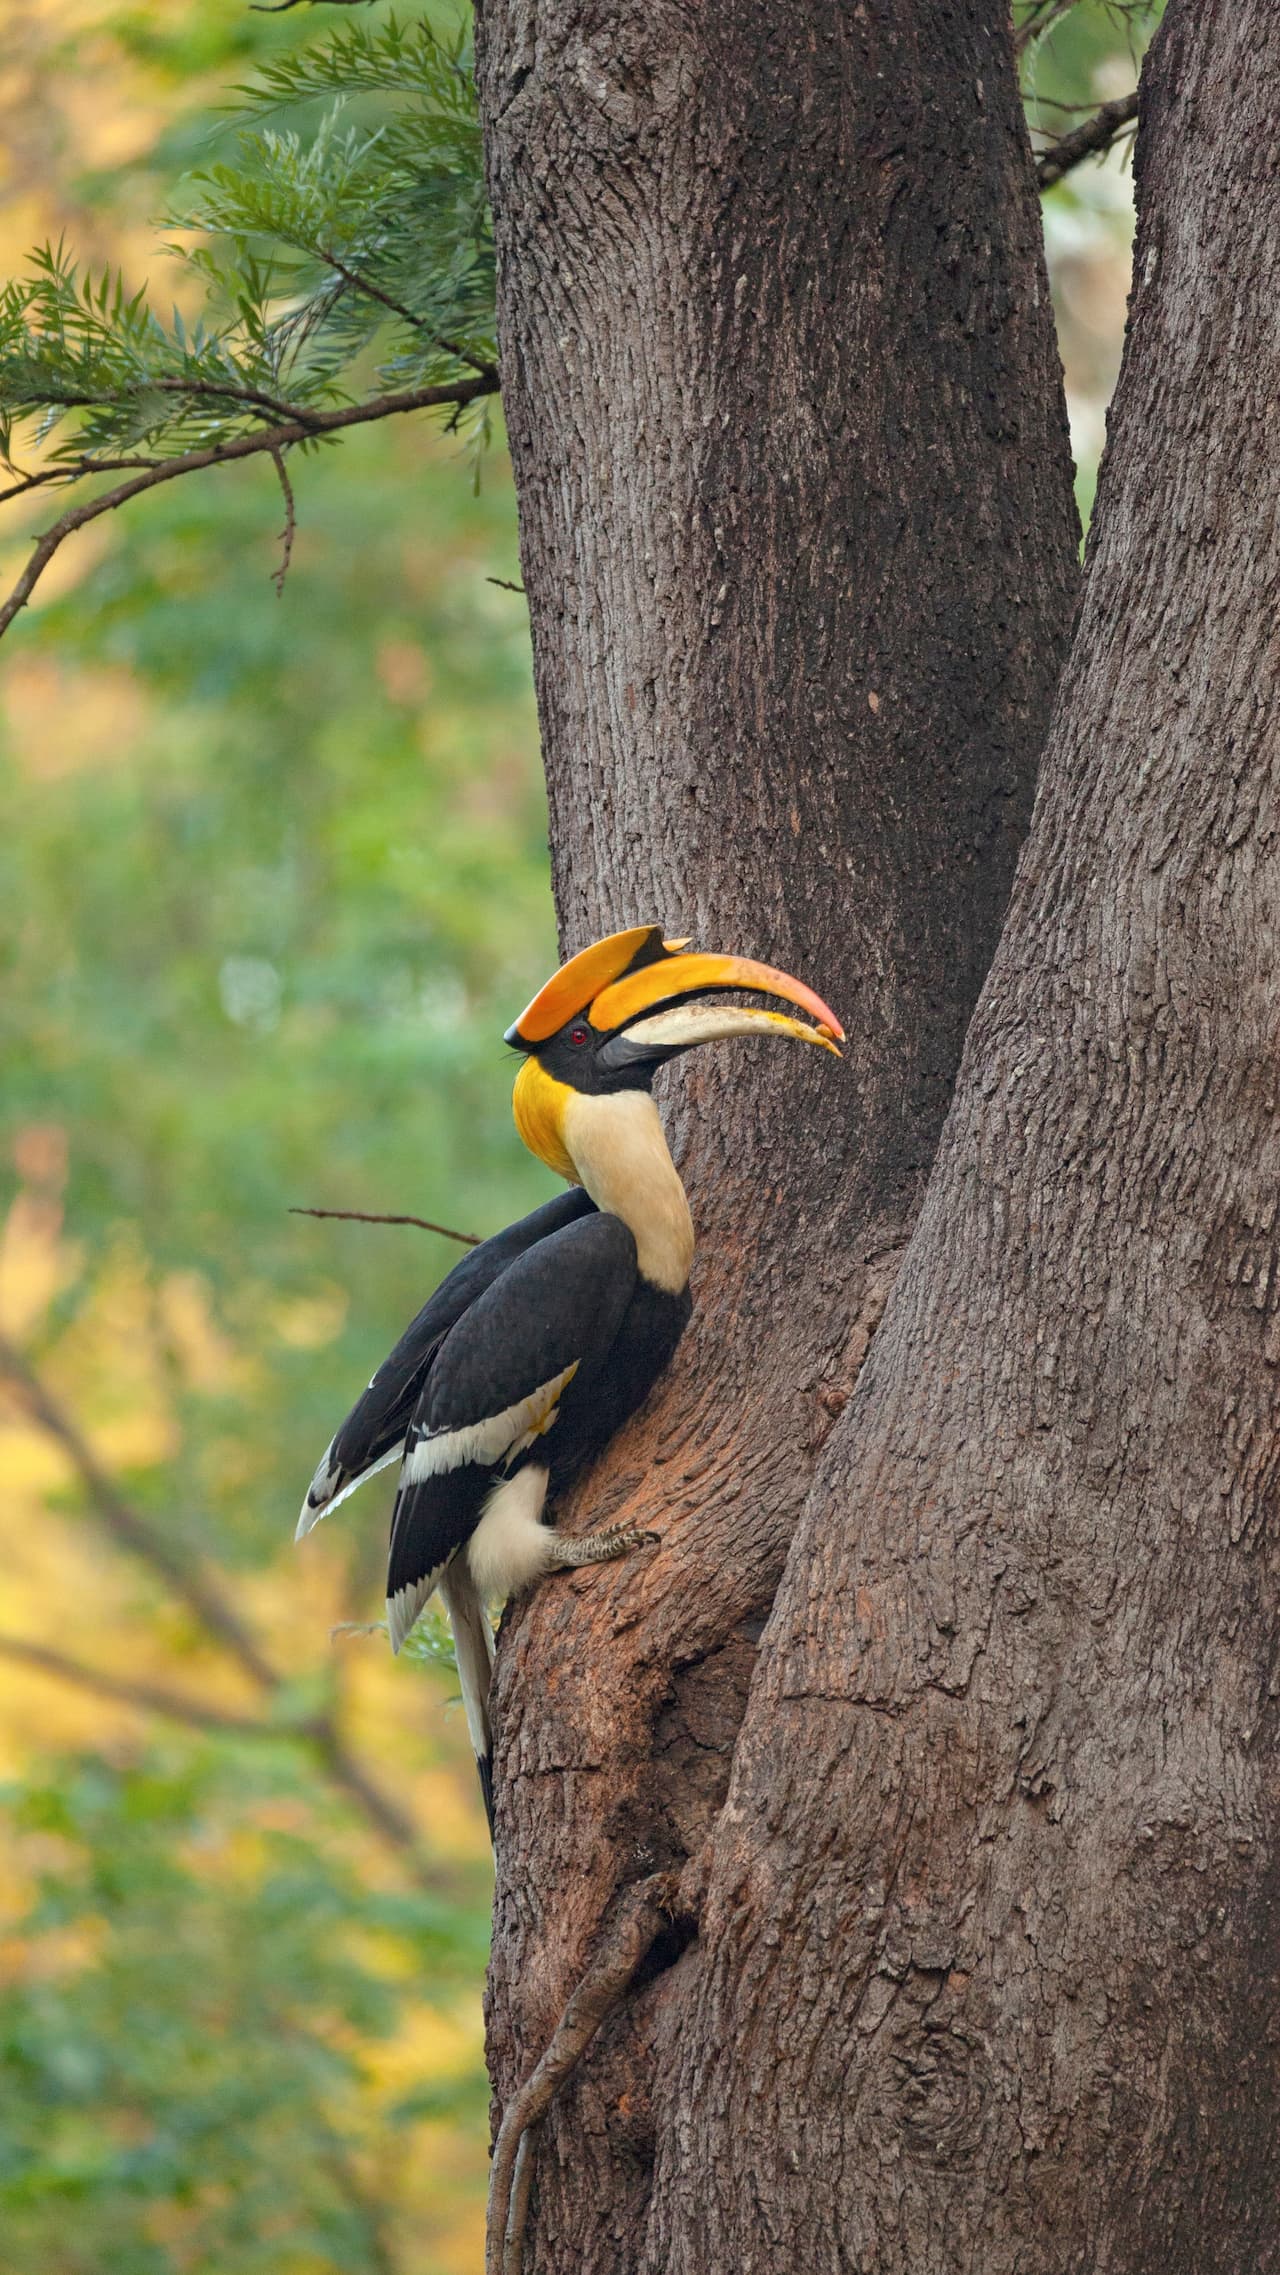 The Great Hornbill Climbing In The Nearest Branch Of A Tree